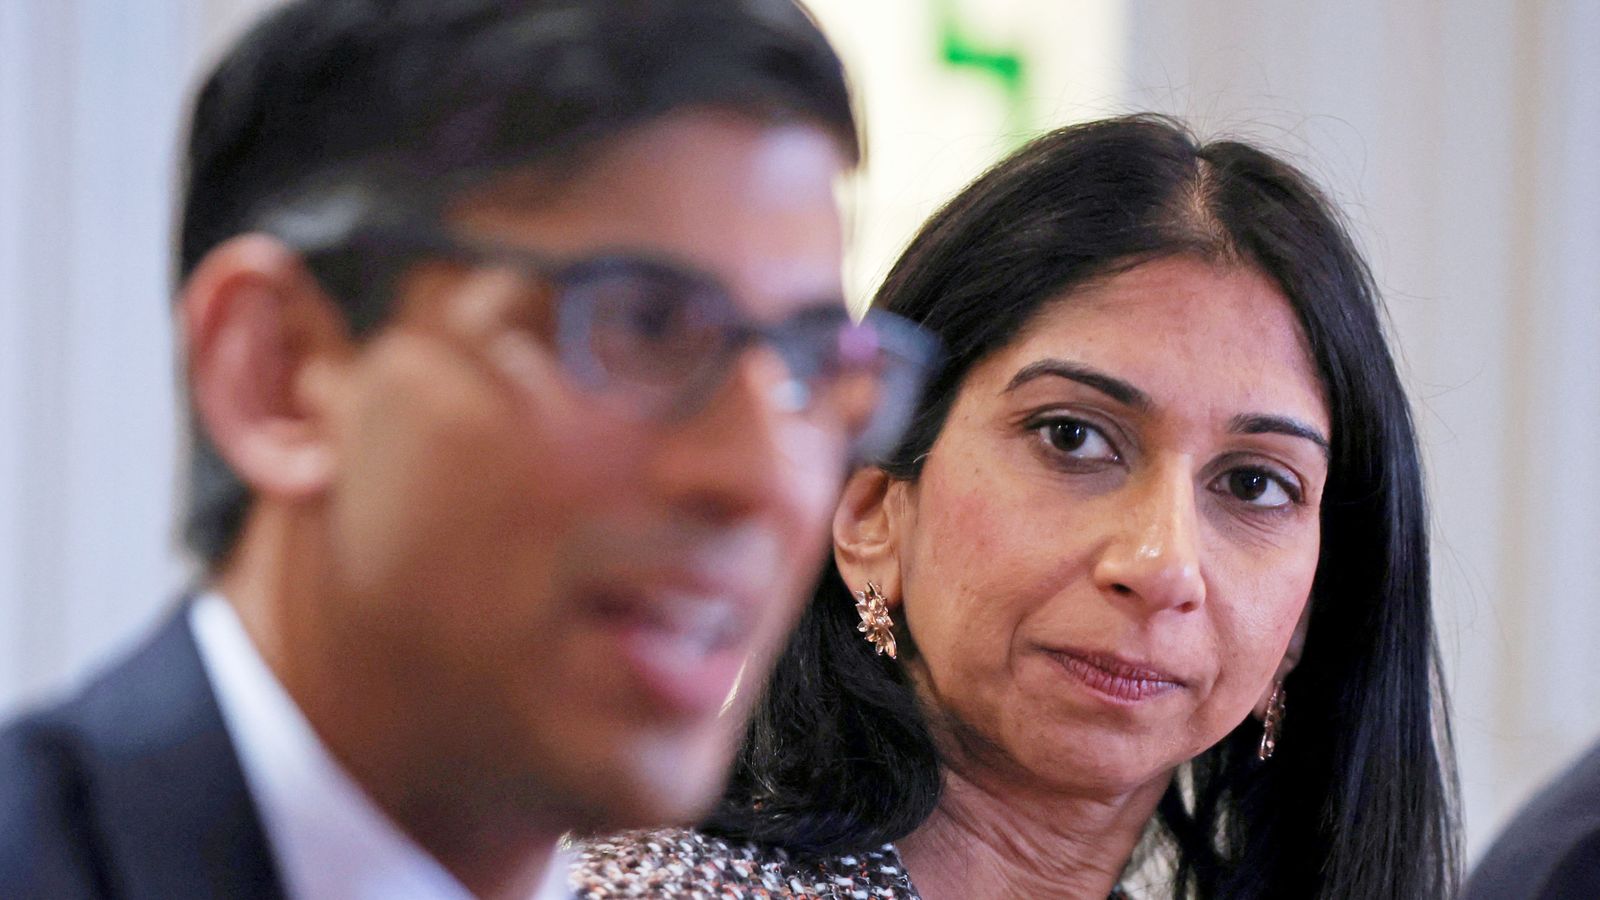 Rishi Sunak has 'full confidence' in Suella Braverman after controversial article, No 10 says